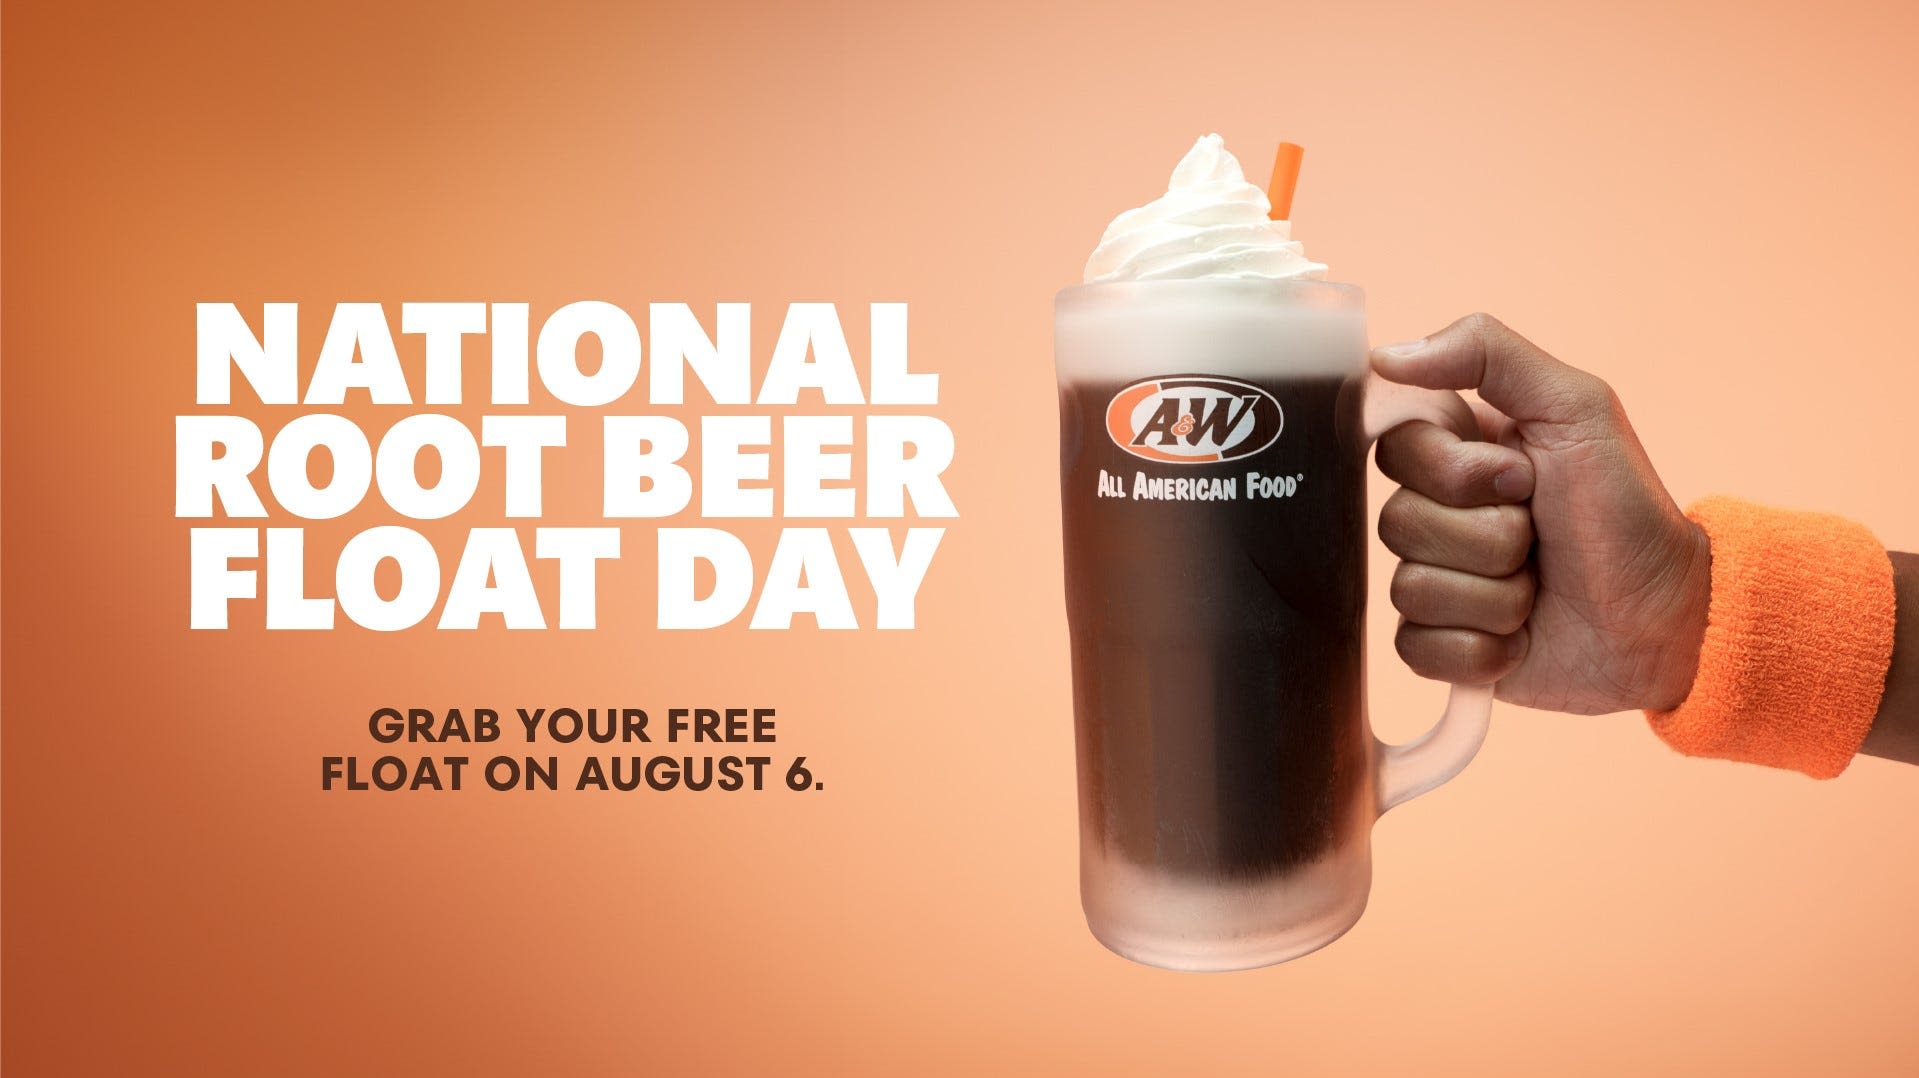 National Root Beer Float Day: How to get your free float at A&W